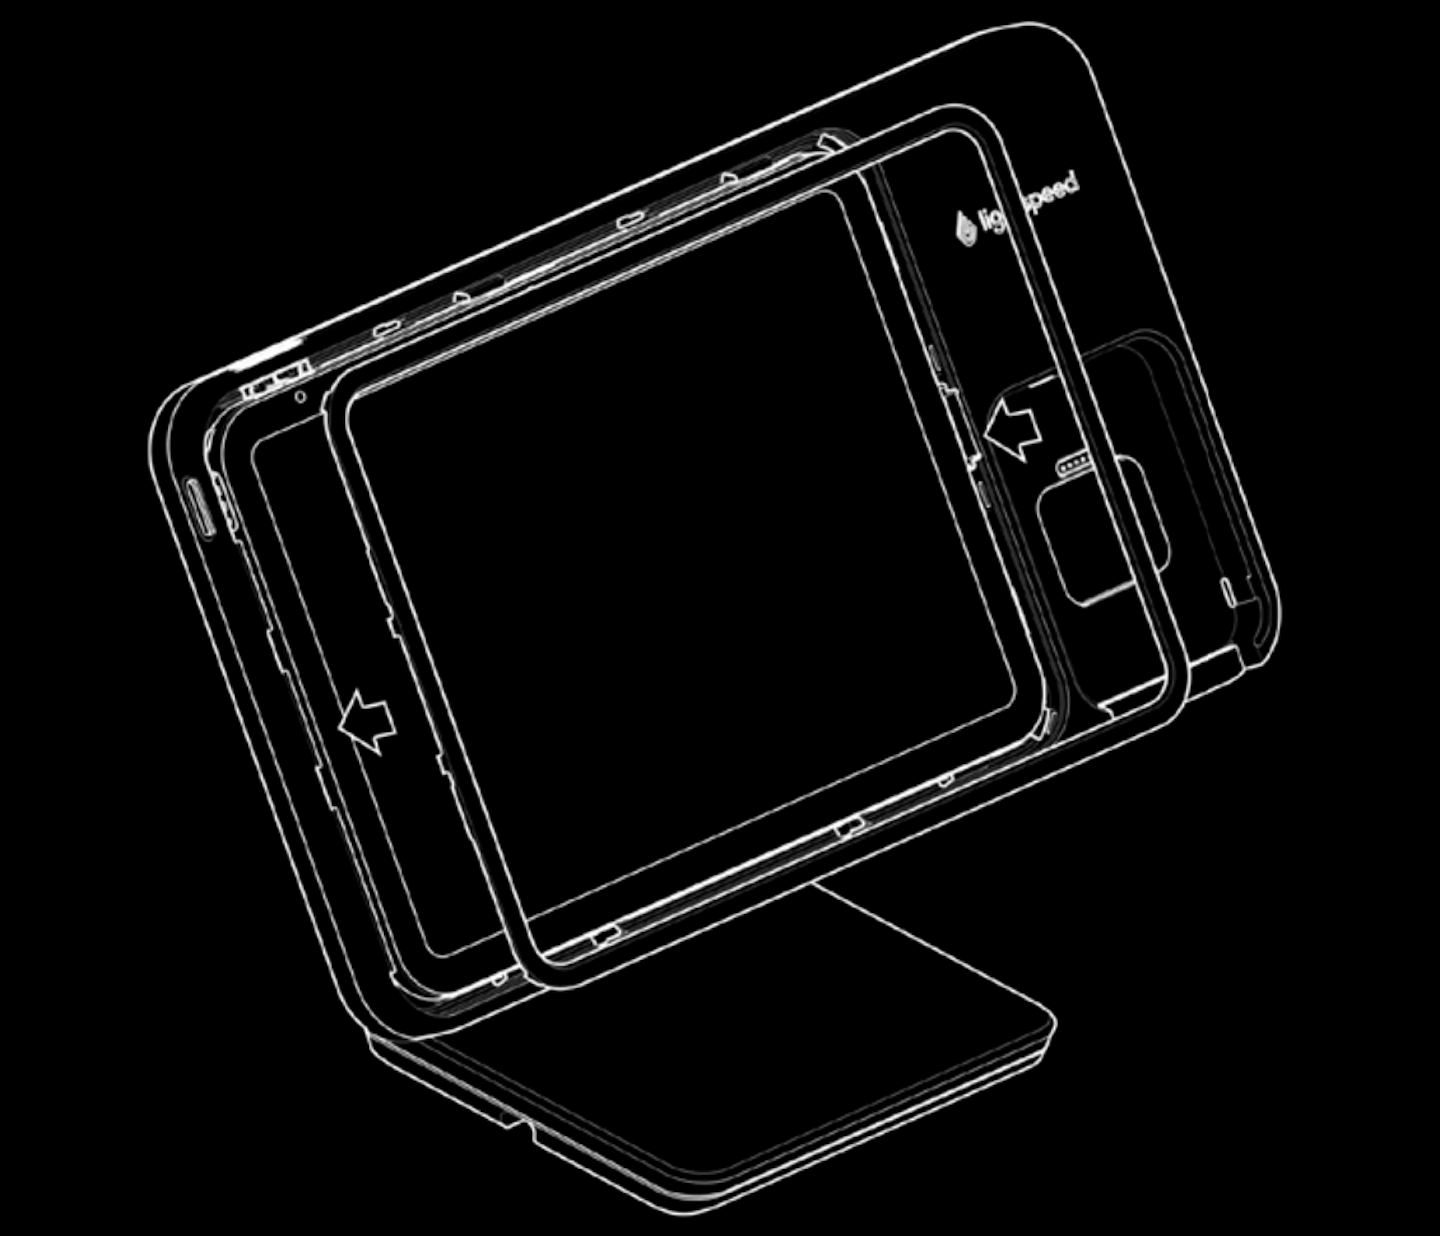 Illustration of Lightspeed Stand with Payments with bezel being placed over the edges of the iPad.